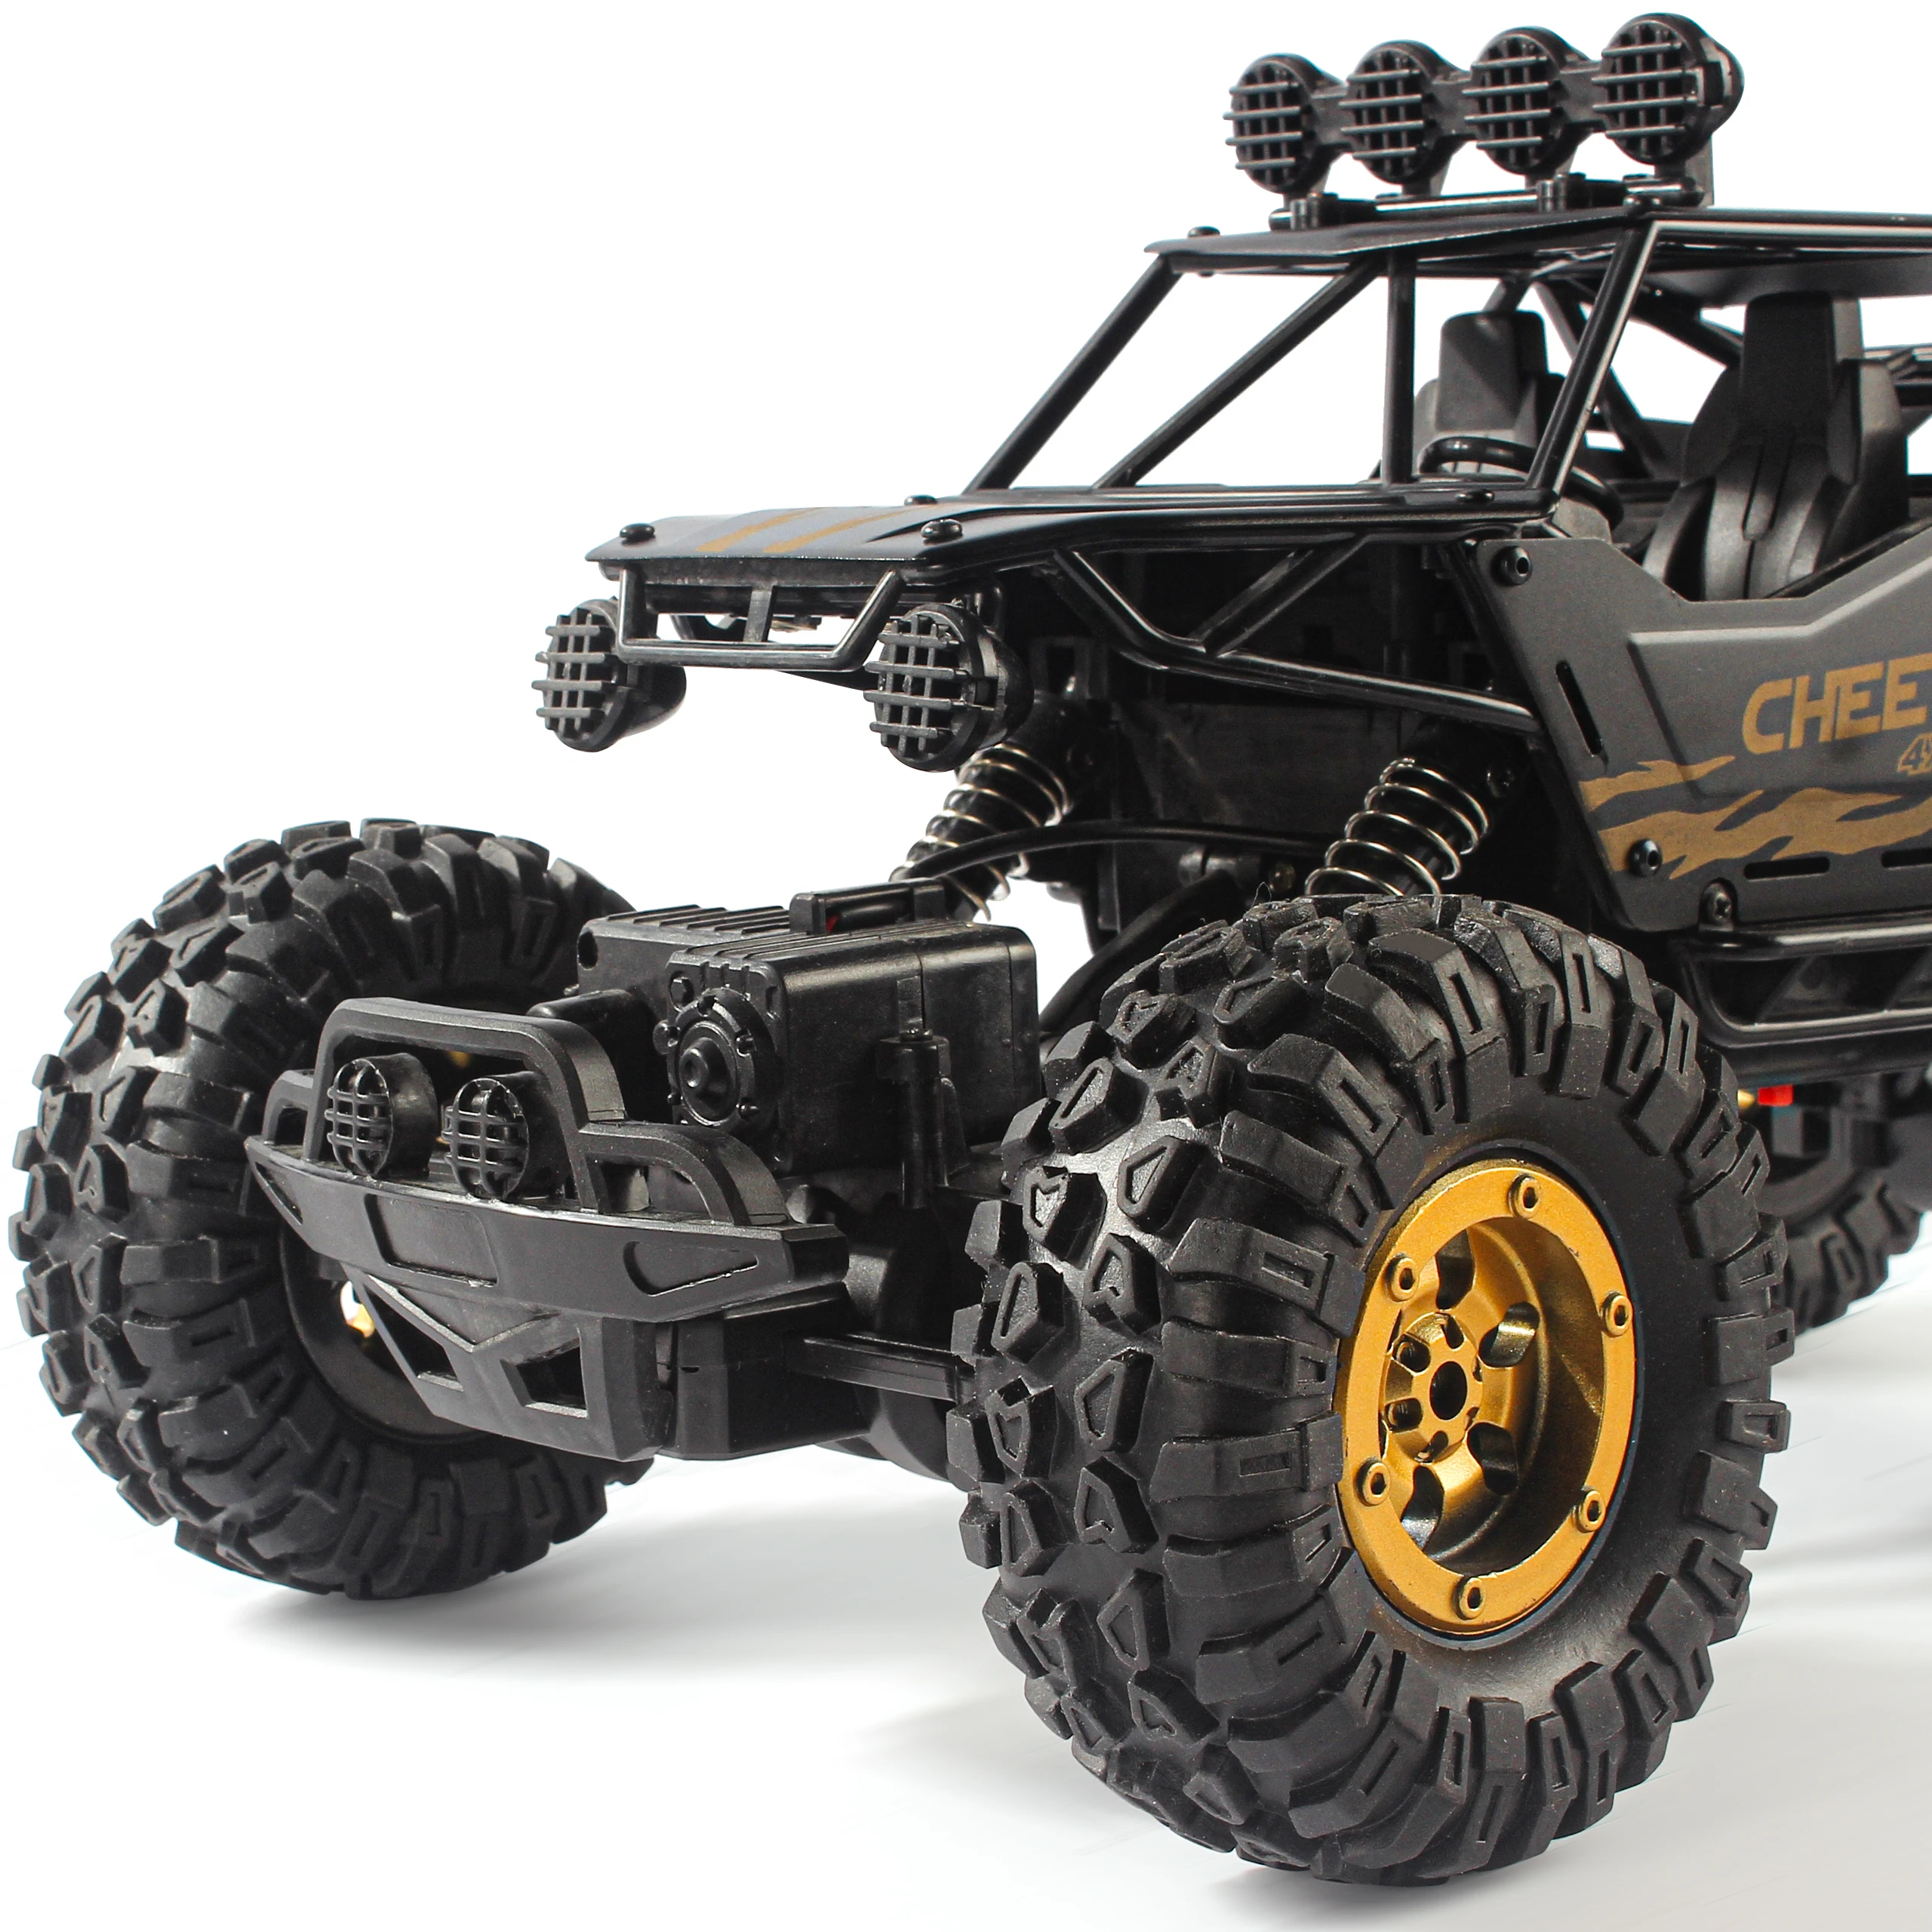 1/12 Bigfoot Electric Alloy Powerful High Speed Off-Road SUV Vehicle Wall Climbing Remote Control Toy Car